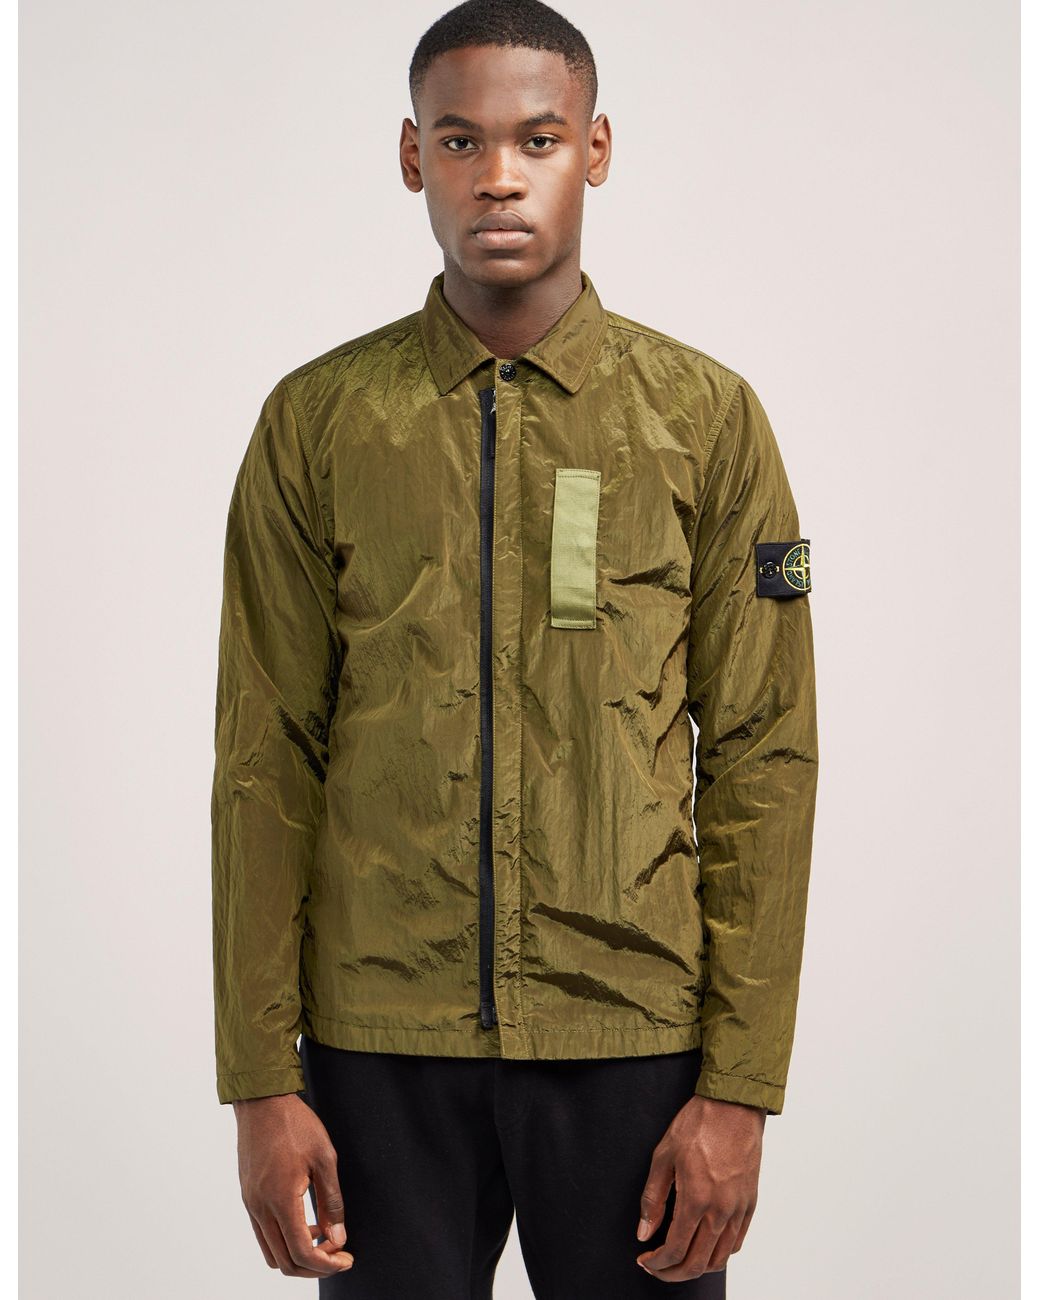 Stone Island Synthetic Nylon Metal Overshirt in Olive (Green) for Men ...